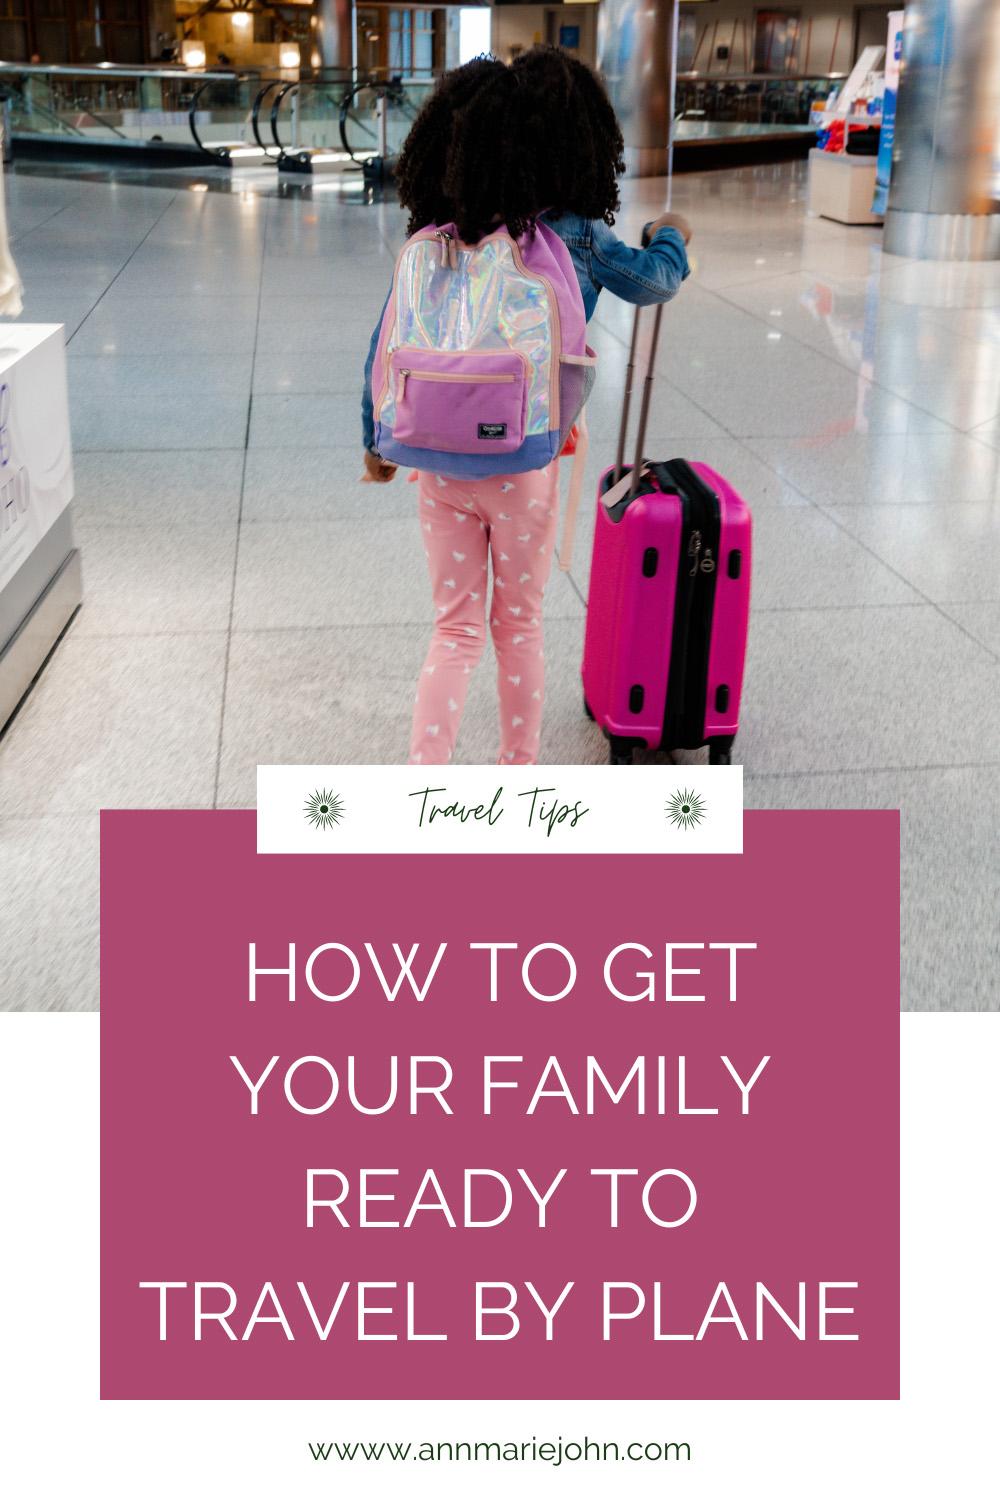 How to Get Your Family Ready to Travel by Plane